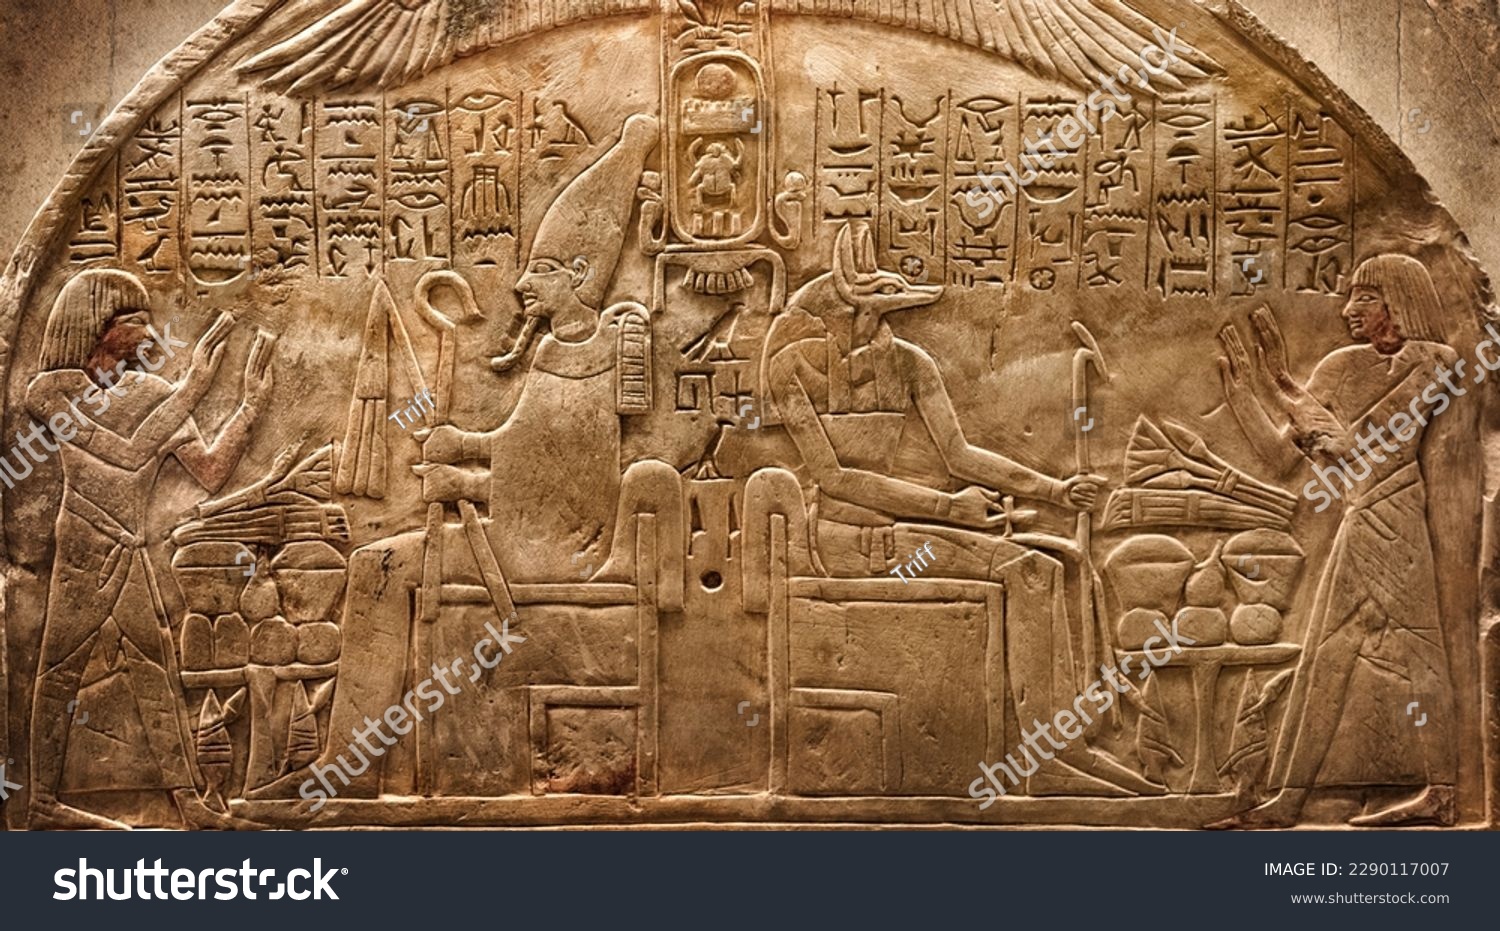 Ancient Egyptian deities Osiris and Anubis, Egyptian hieroglyphs.  Historical and culture background. Ancient Egyptian hieroglyphs as a symbol of the history of the Earth.   #2290117007